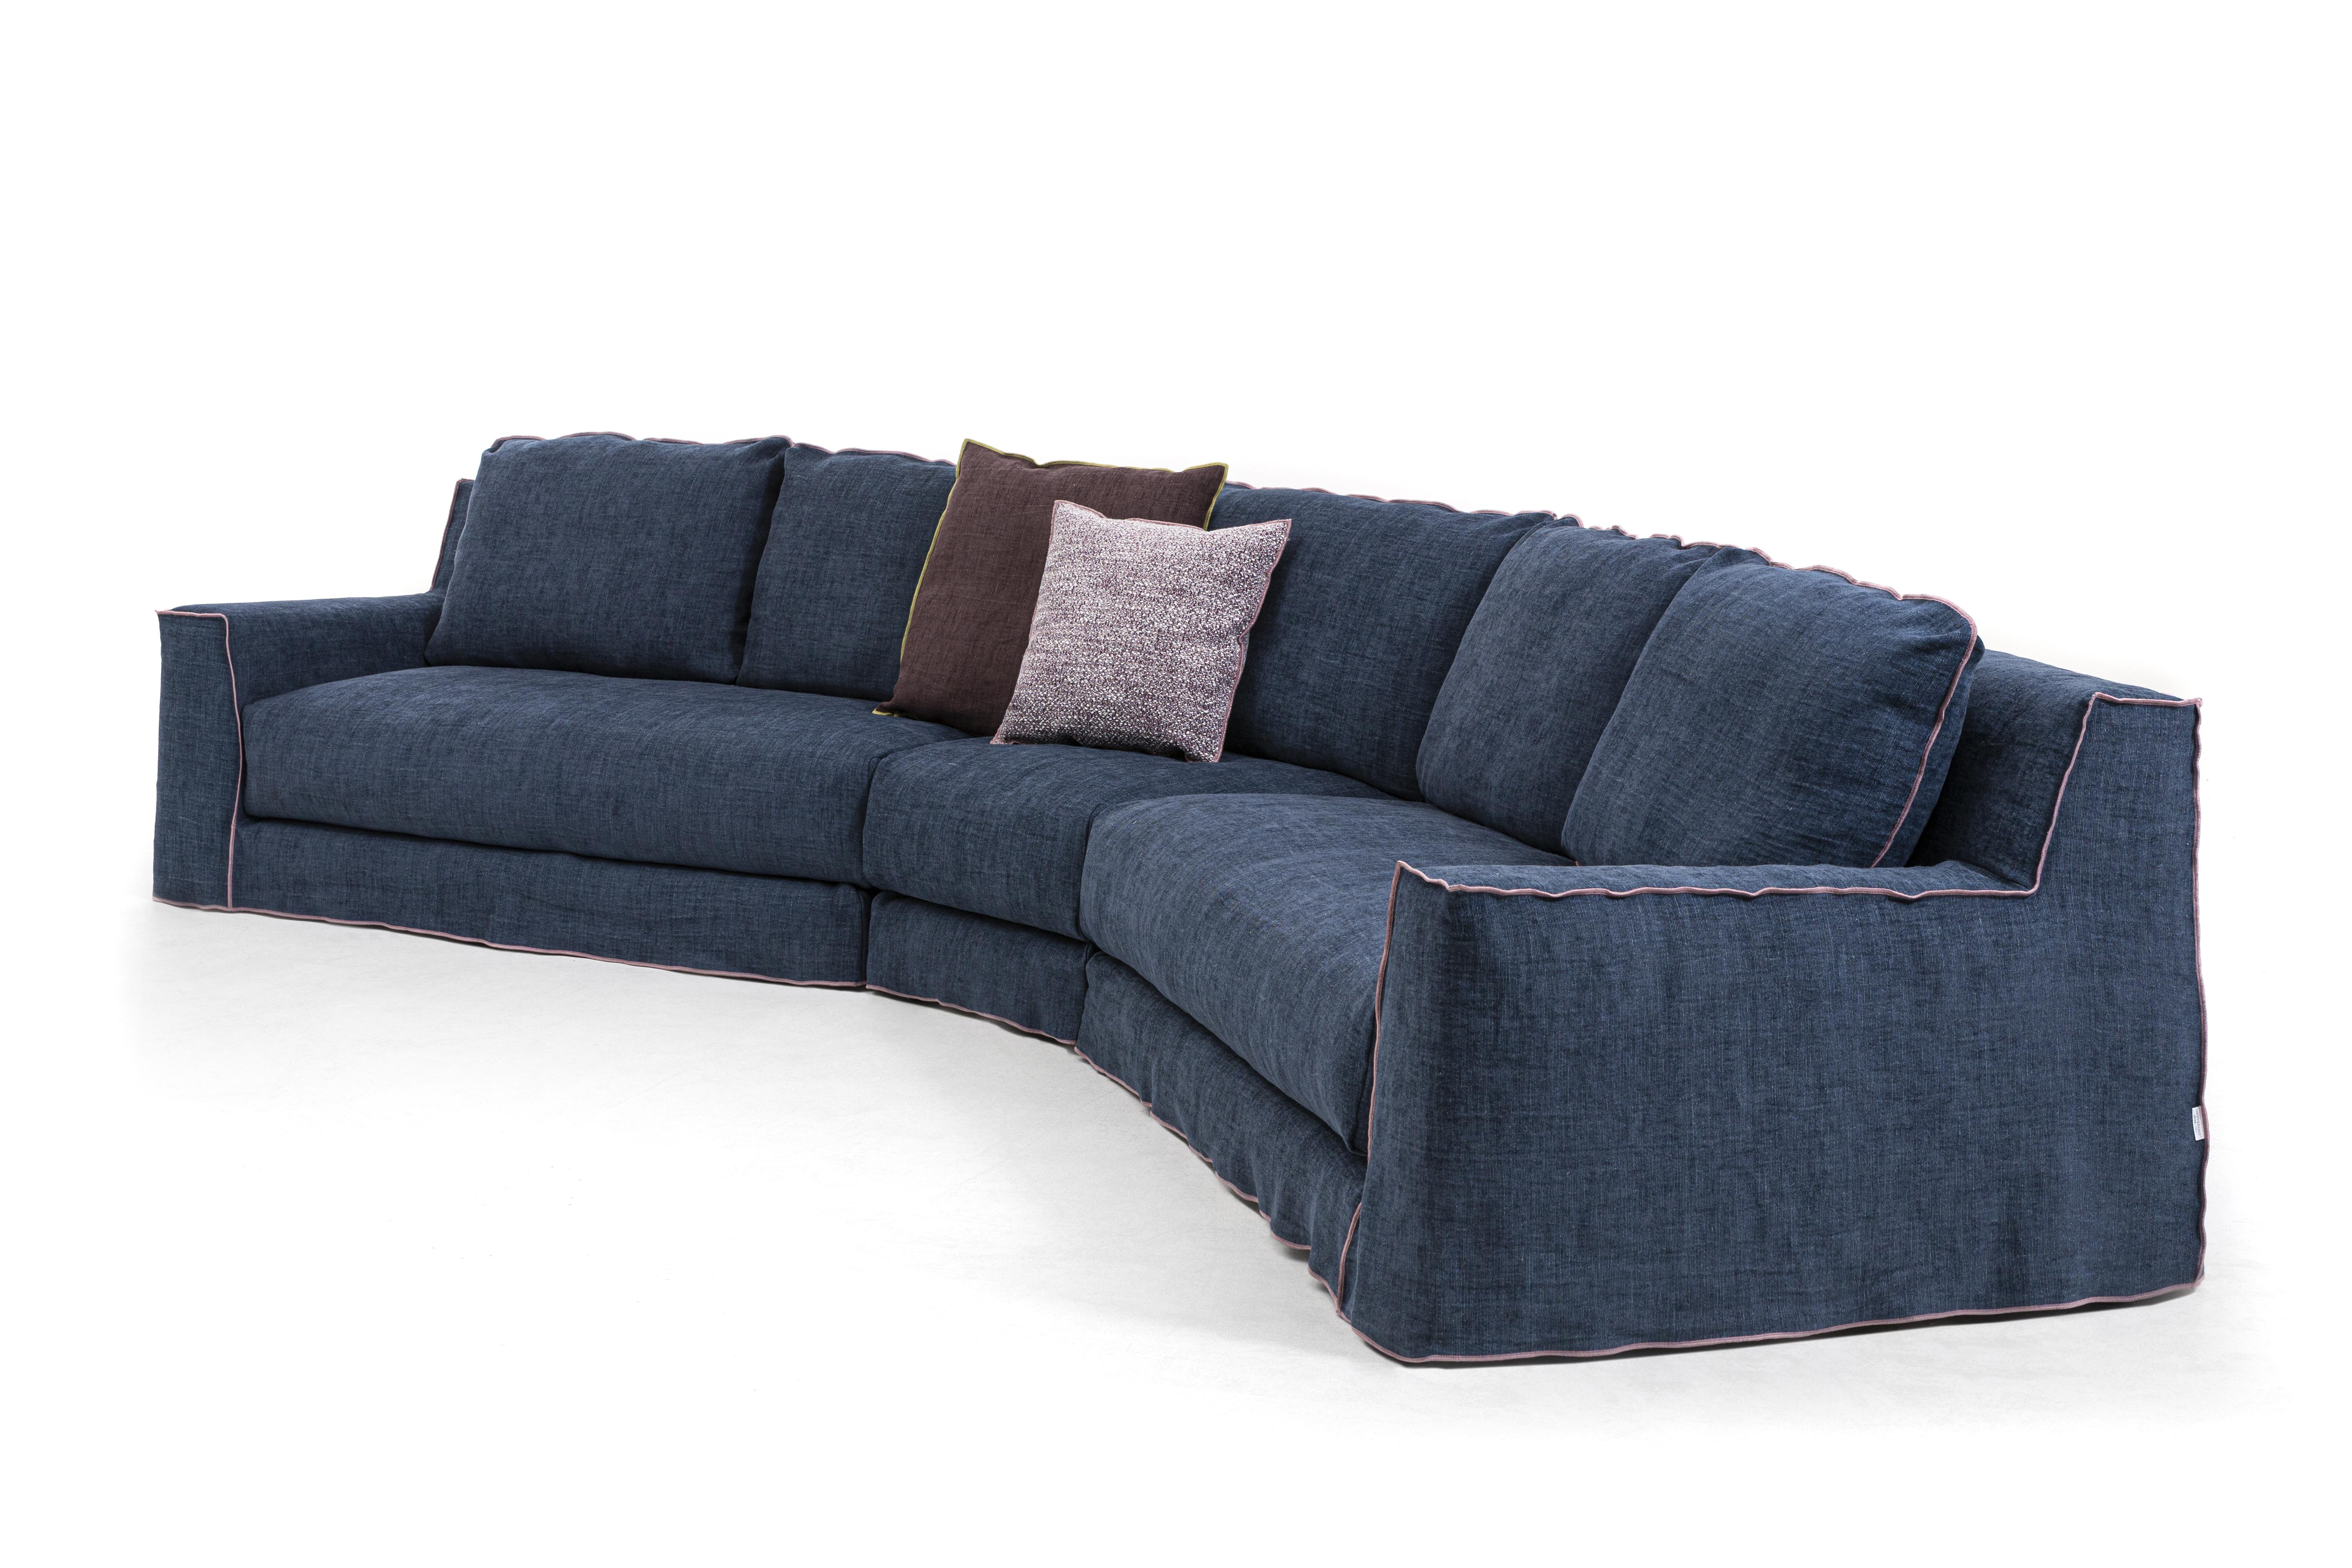 Modern Gervasoni Loll 10 Modular Sofa in Munch Upholstery by Paola Navone For Sale